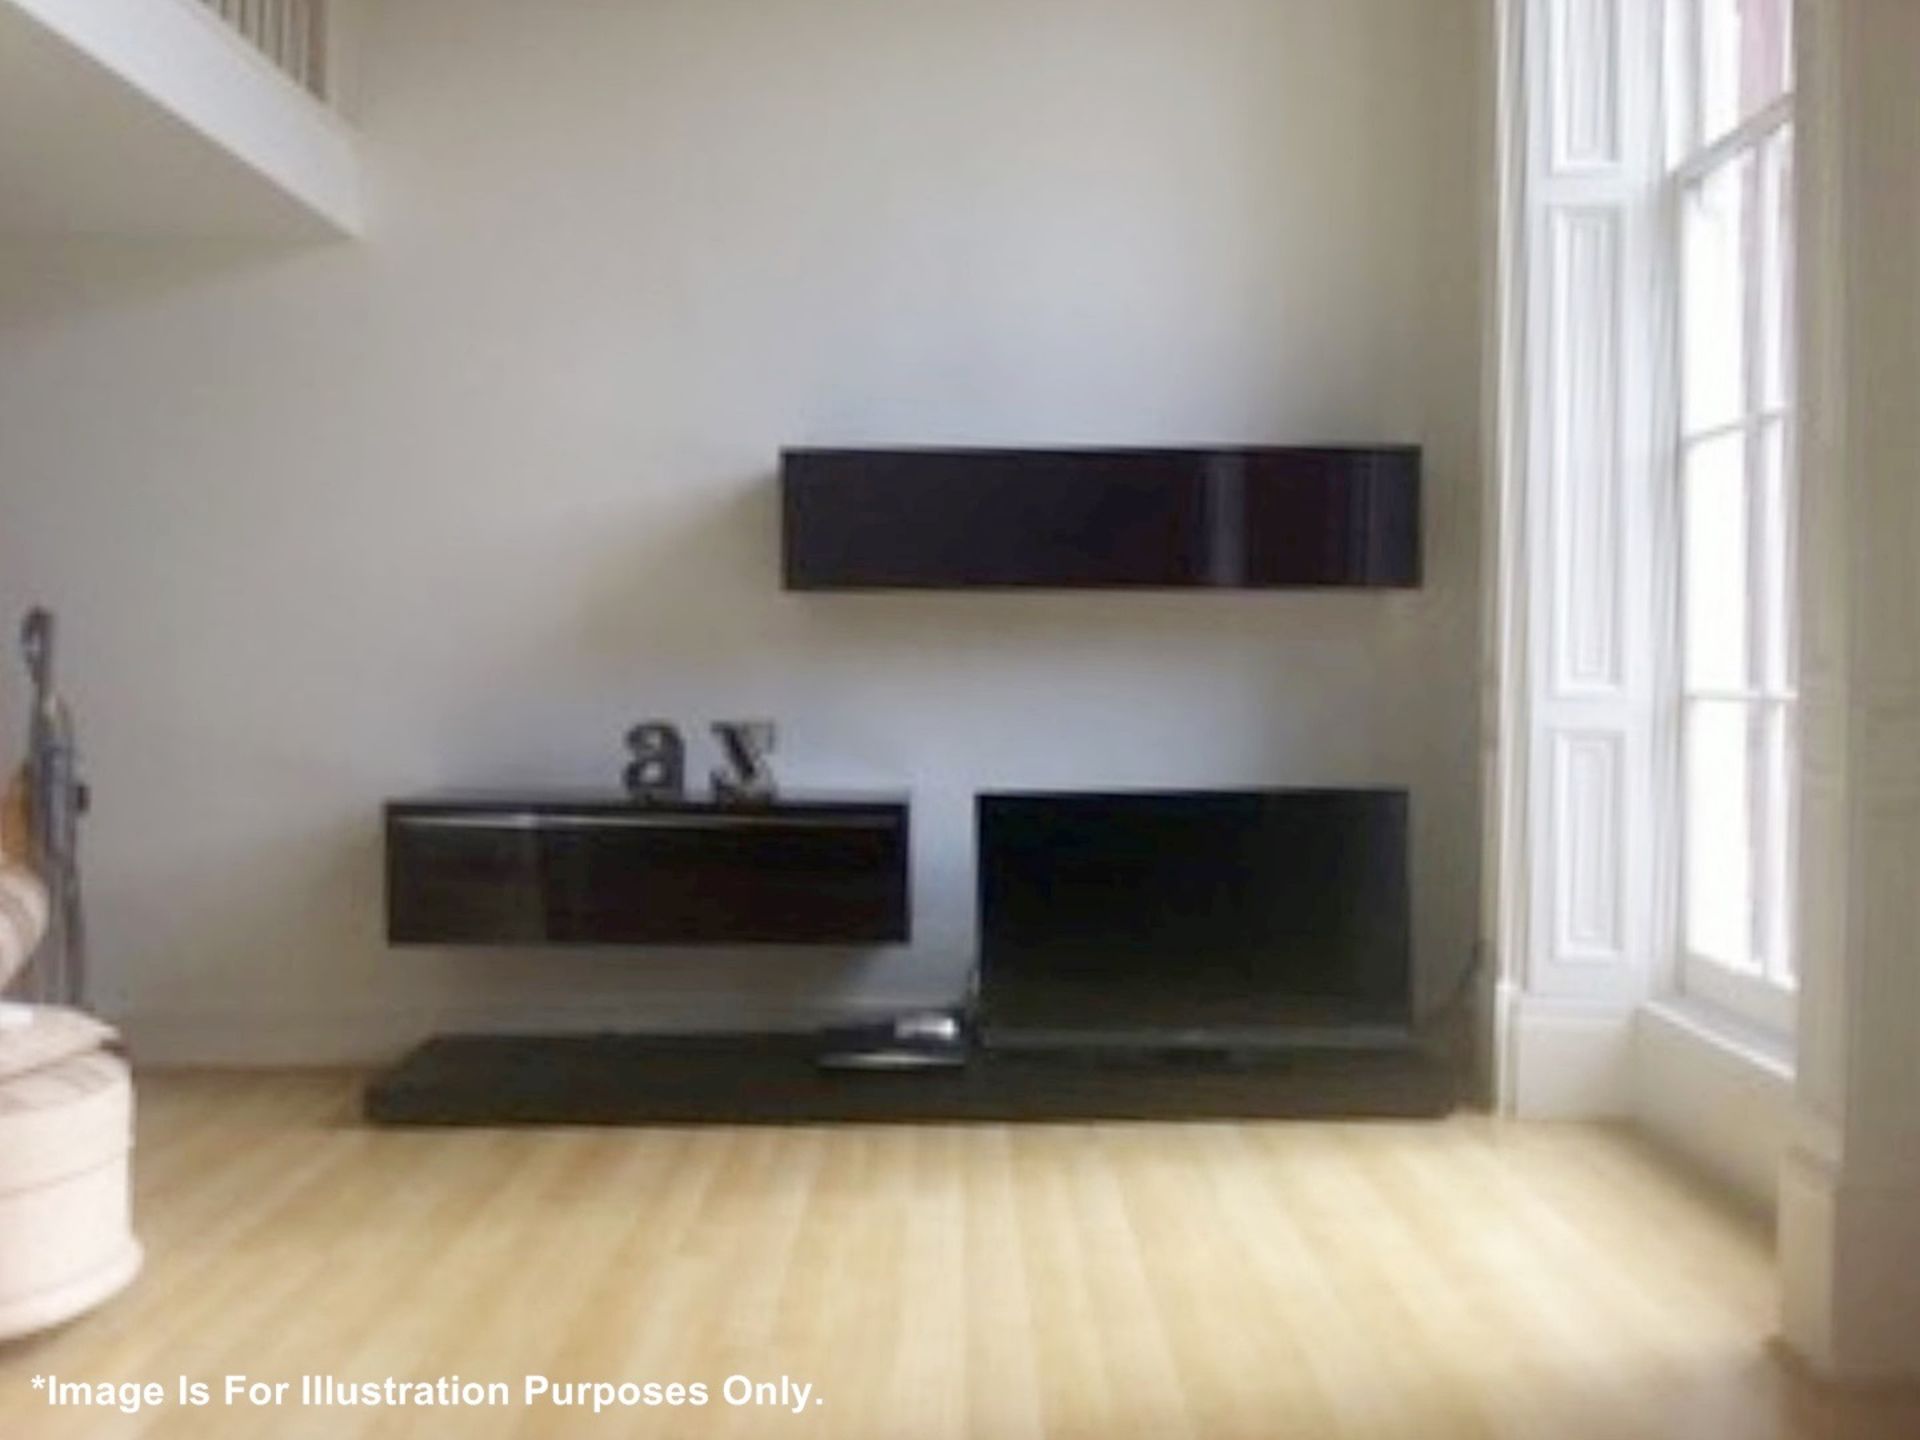 3-Piece Floating Wall Storage, Consisting Of 2 x Purple Gloss Cabinets And 1 x Large Wooden Shelf